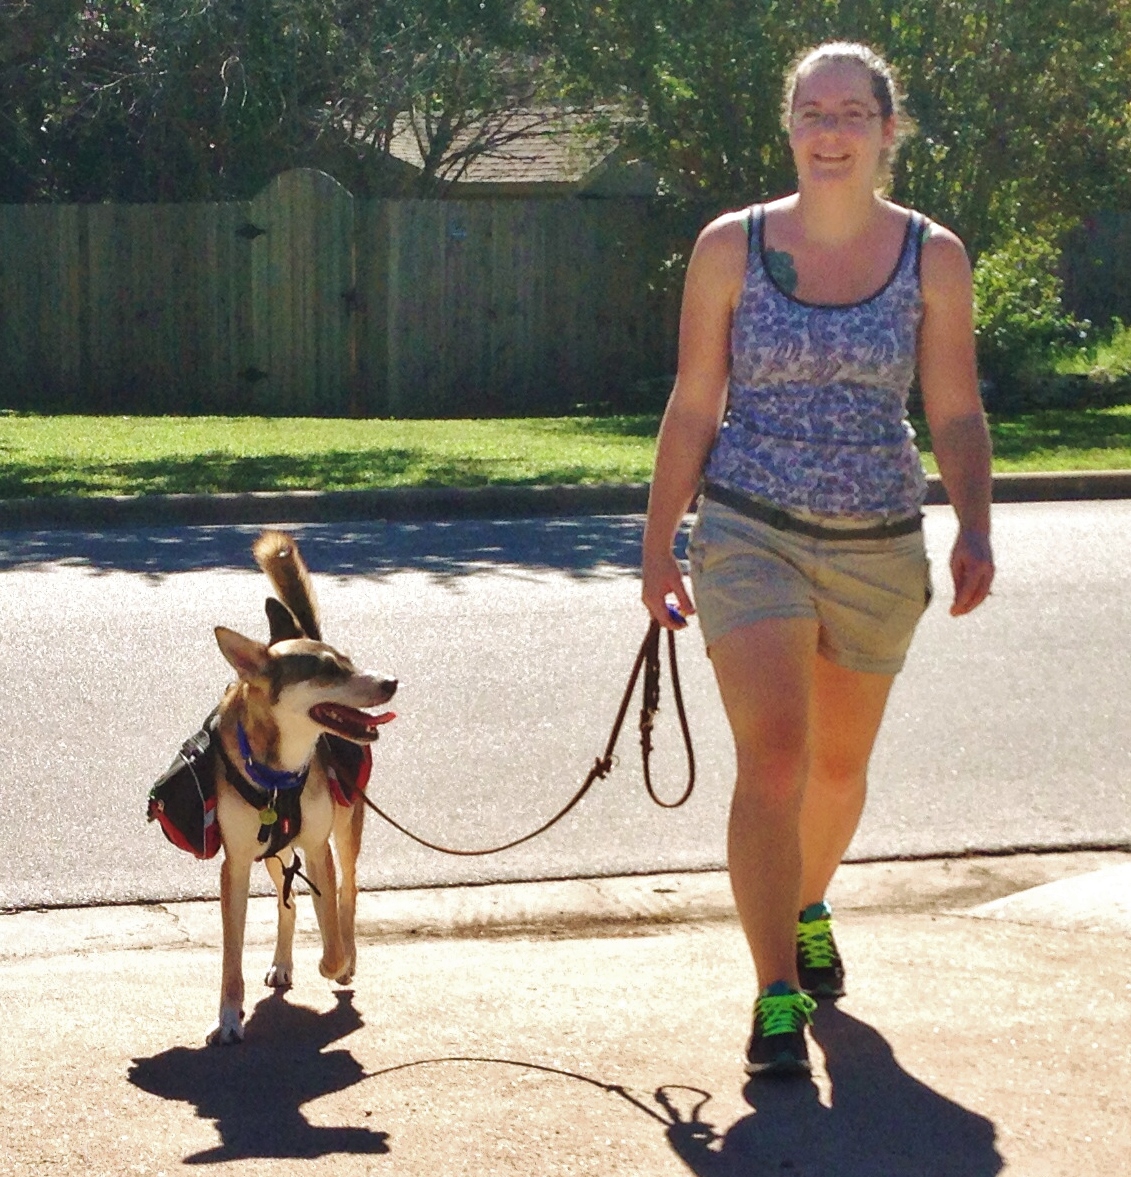 Top 5 Loose Leash Walking Dog Training Videos - The Crossover Trainer's Blog